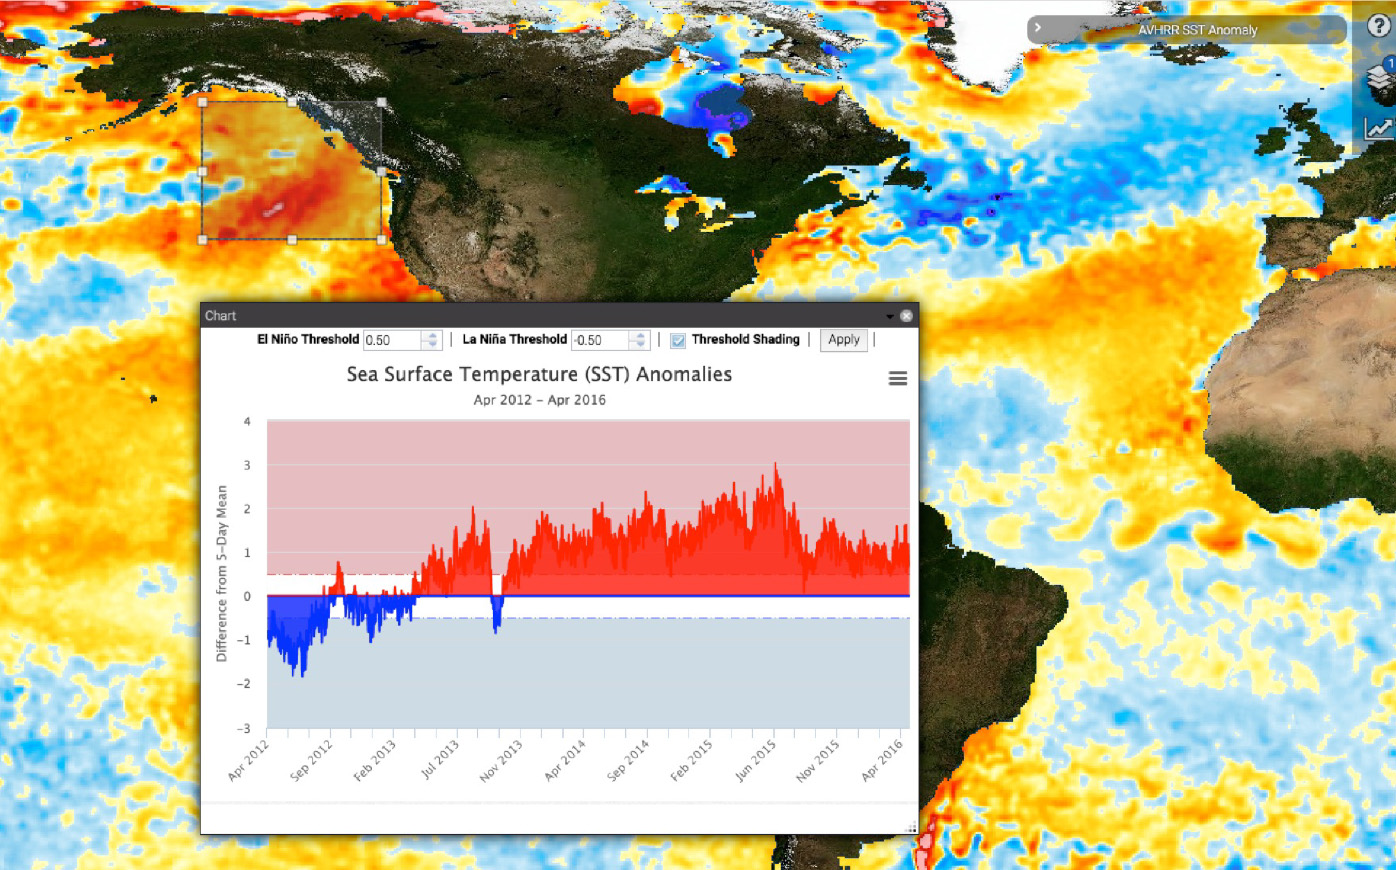 An early example of OceanWorks’ web-based analysis capability (from the OceanXtremes project), this image shows “The Blob” – the large mass of relatively warm water in the Pacific Ocean off the coast of North America from 2013-2015. 